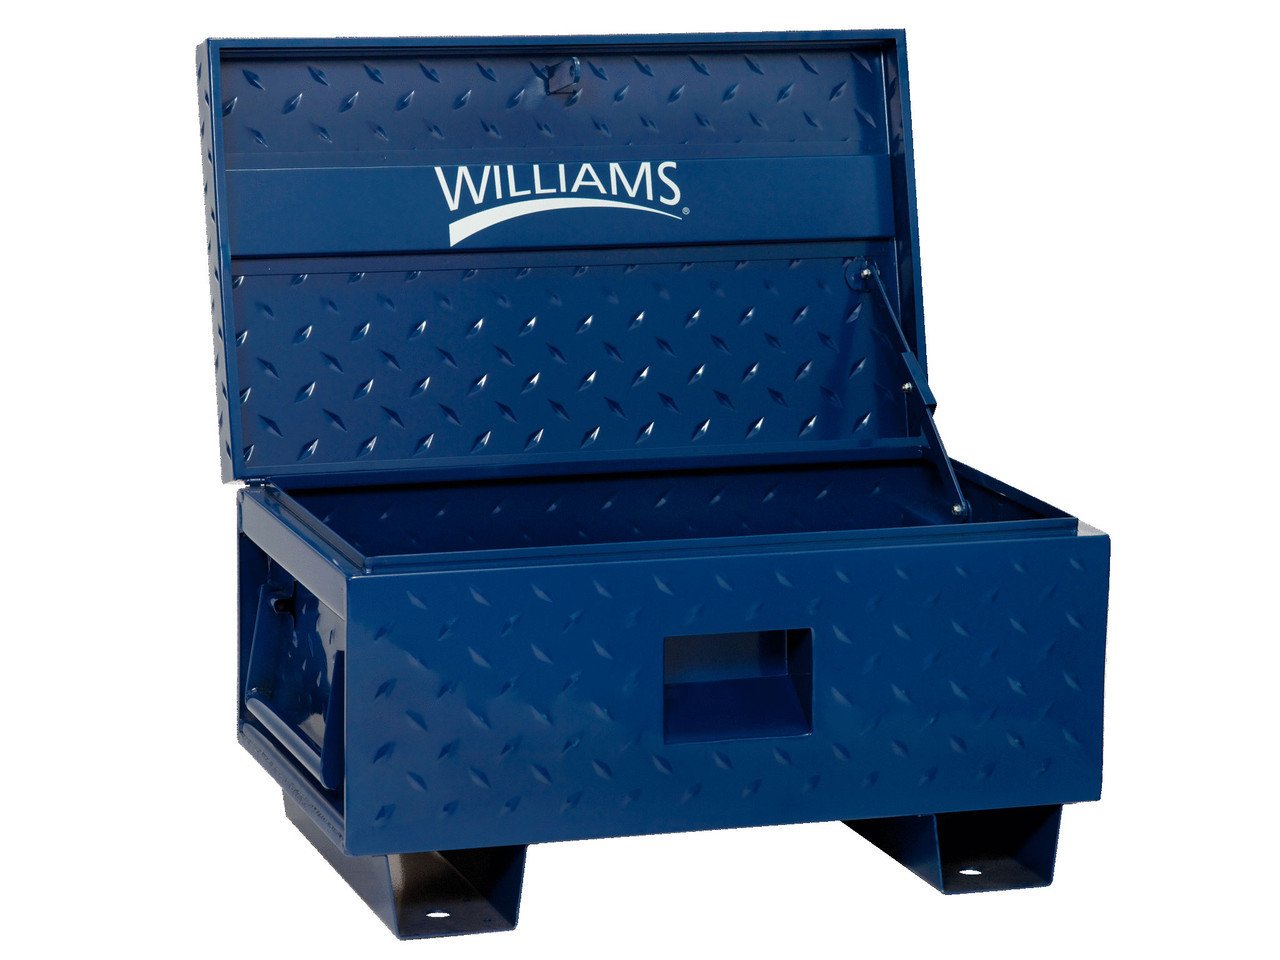 Williams Complete Tools at Height General Service Set with Tool Box 116 Pcs - JHWSC116THTB